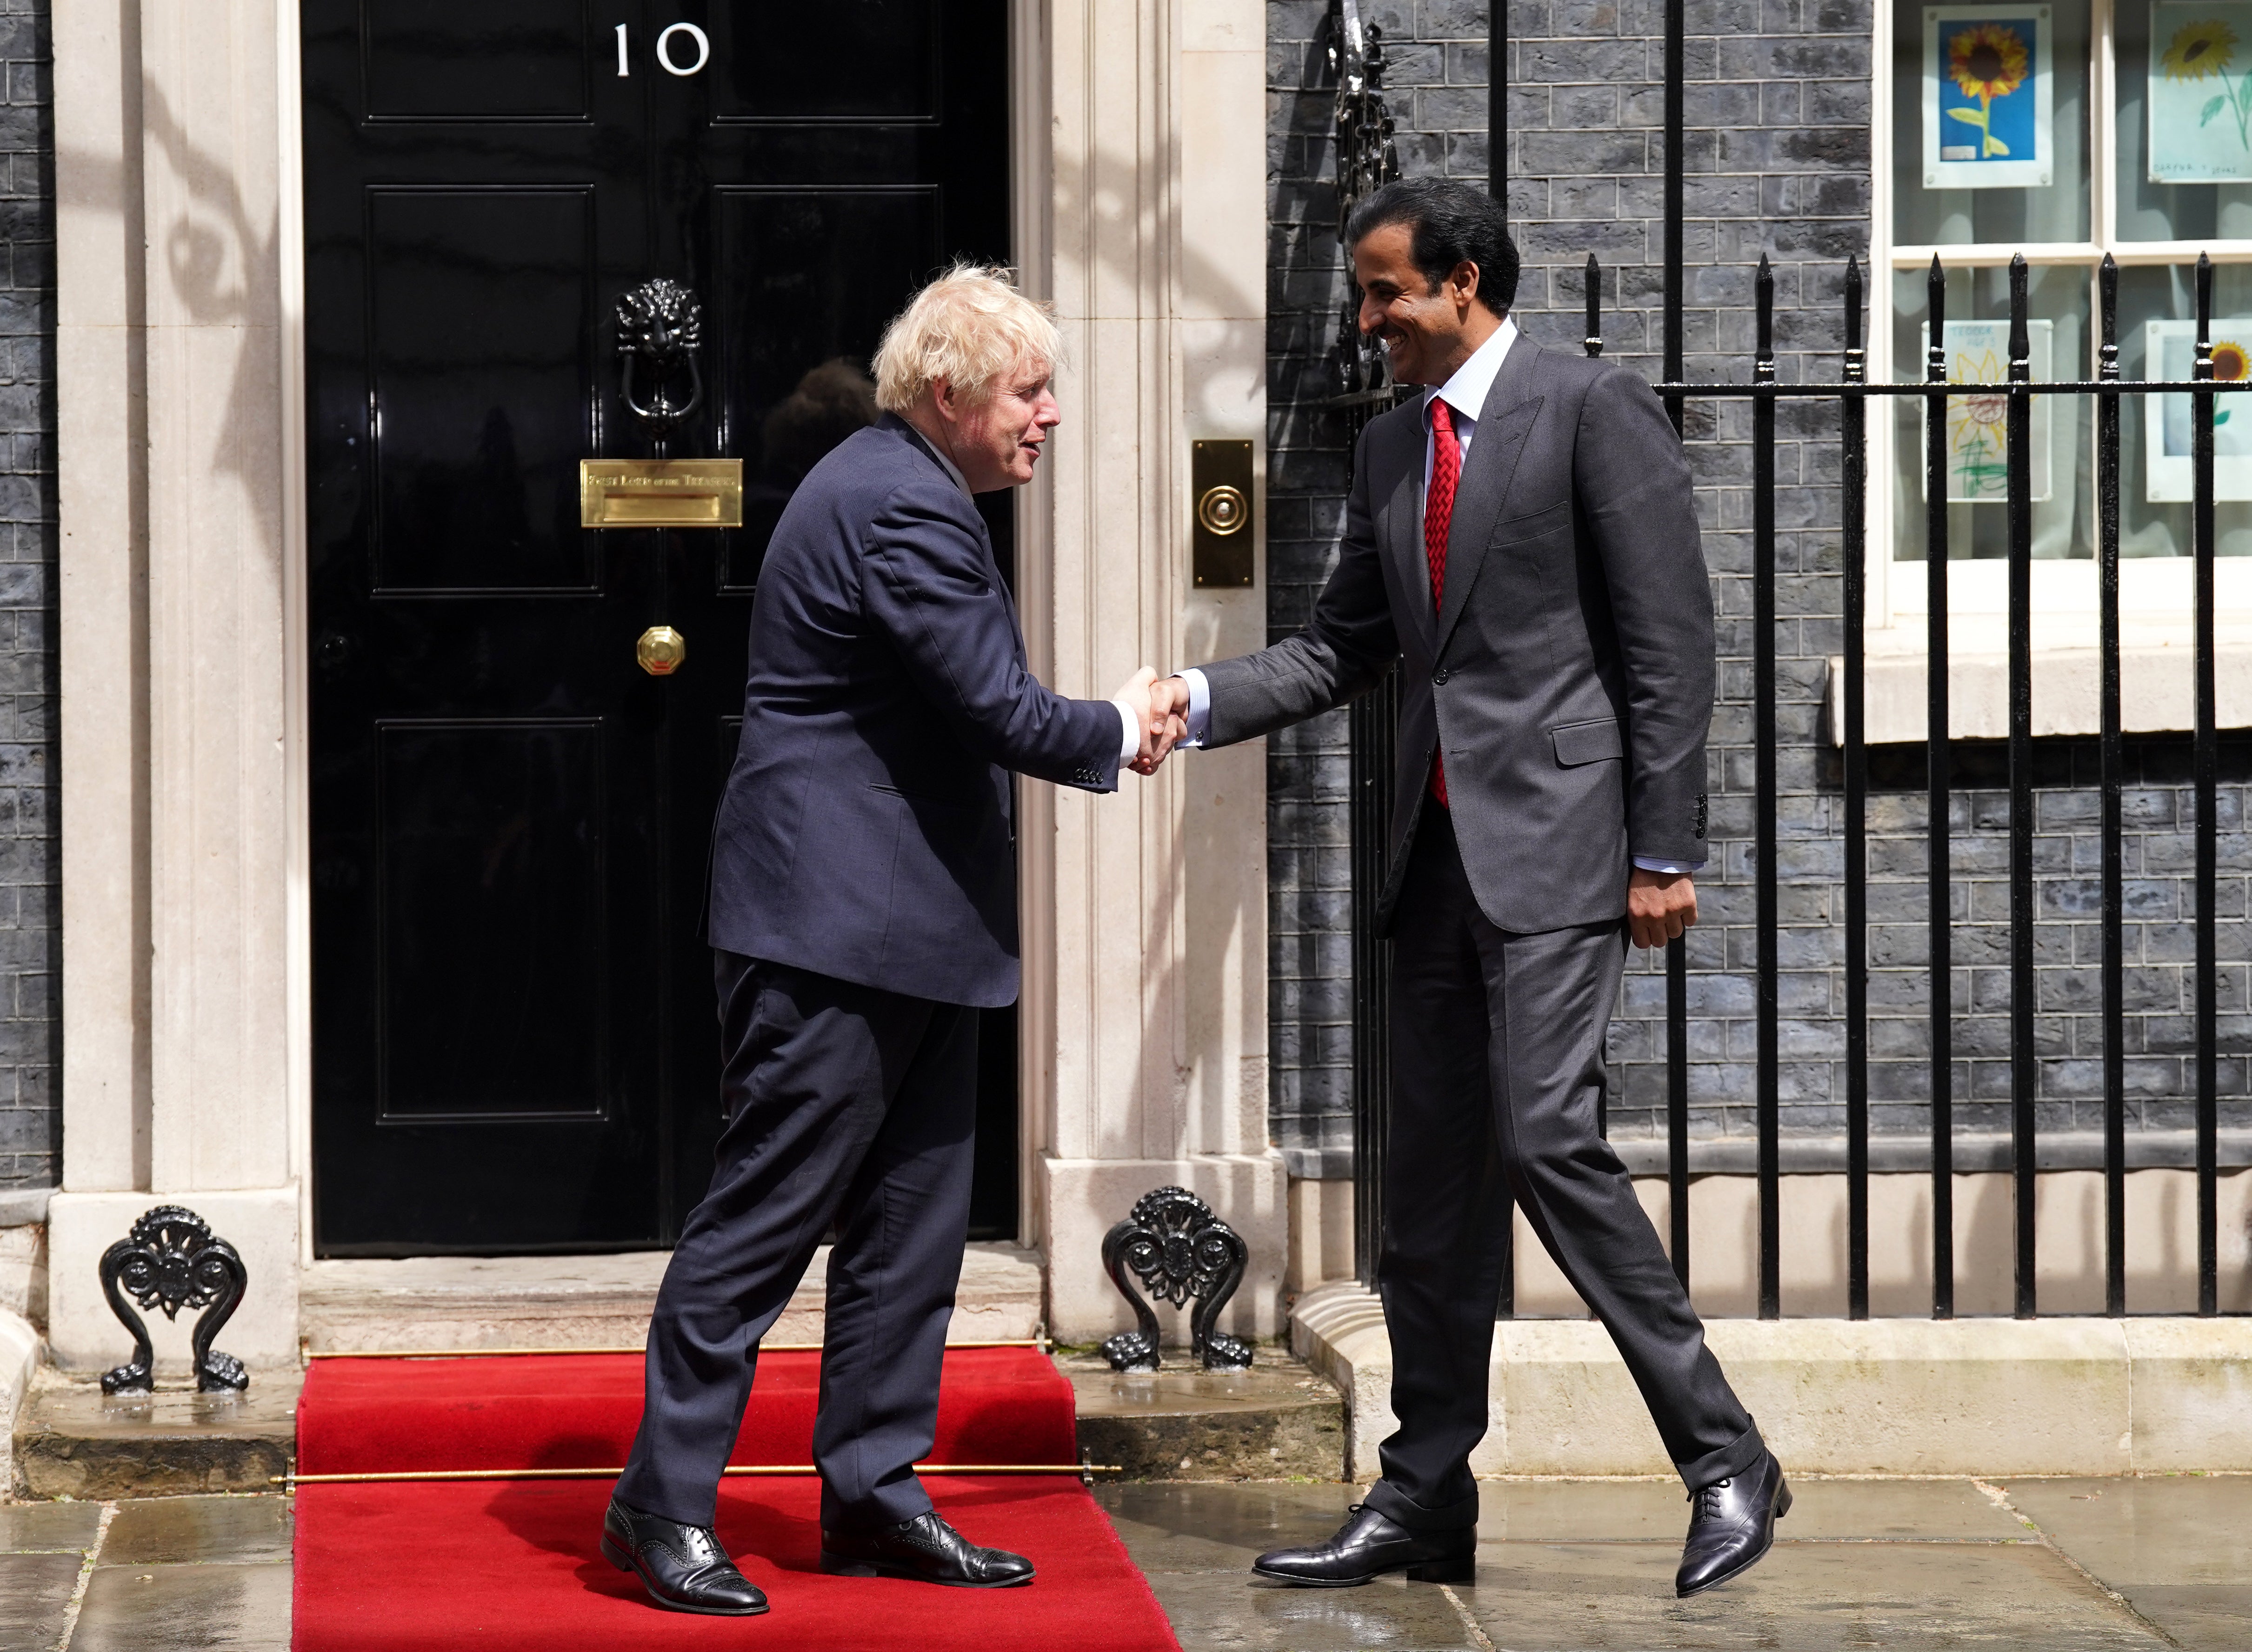 Prime Minister Boris Johnson has been invited to attend the 2022 World Cup by the Emir of Qatar, Sheikh Tamim bin Hamad Al Thani (Stefan Rousseau/PA)